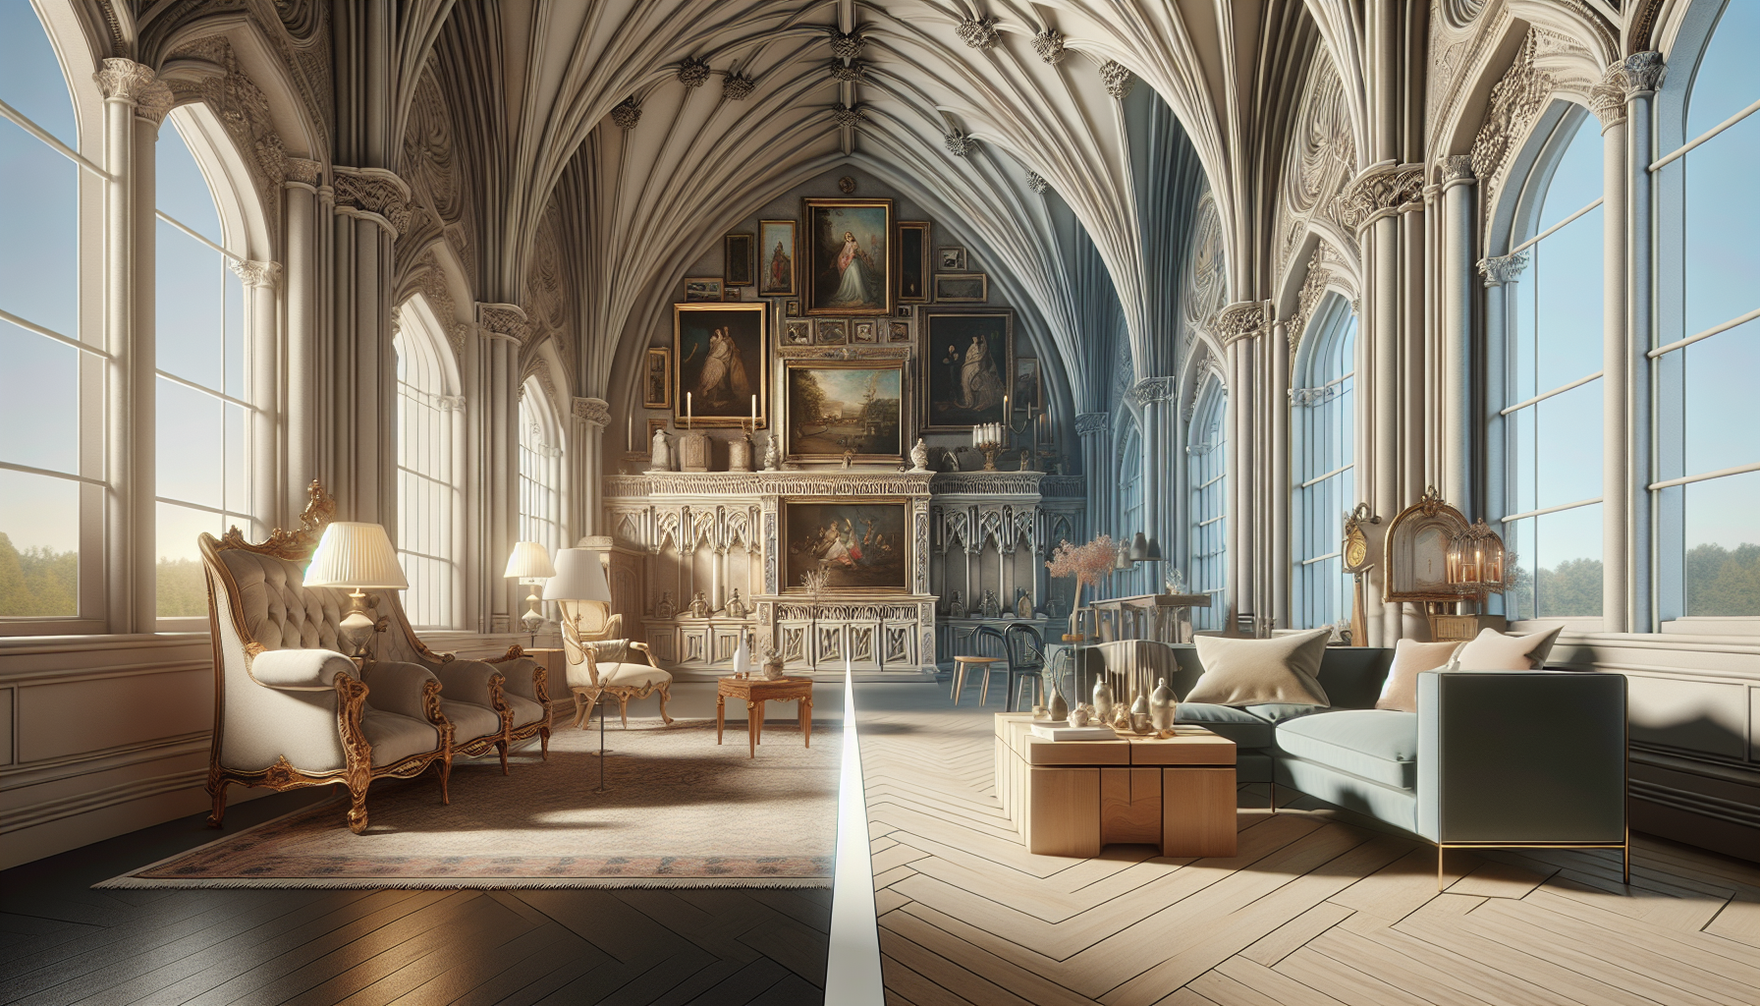 Visualize a scene that encapsulates 'Striking the Perfect Style Balance.' Imagine this to be a grand room in a historical building with Gothic architectural elements such as pointed arches, ribbed vau